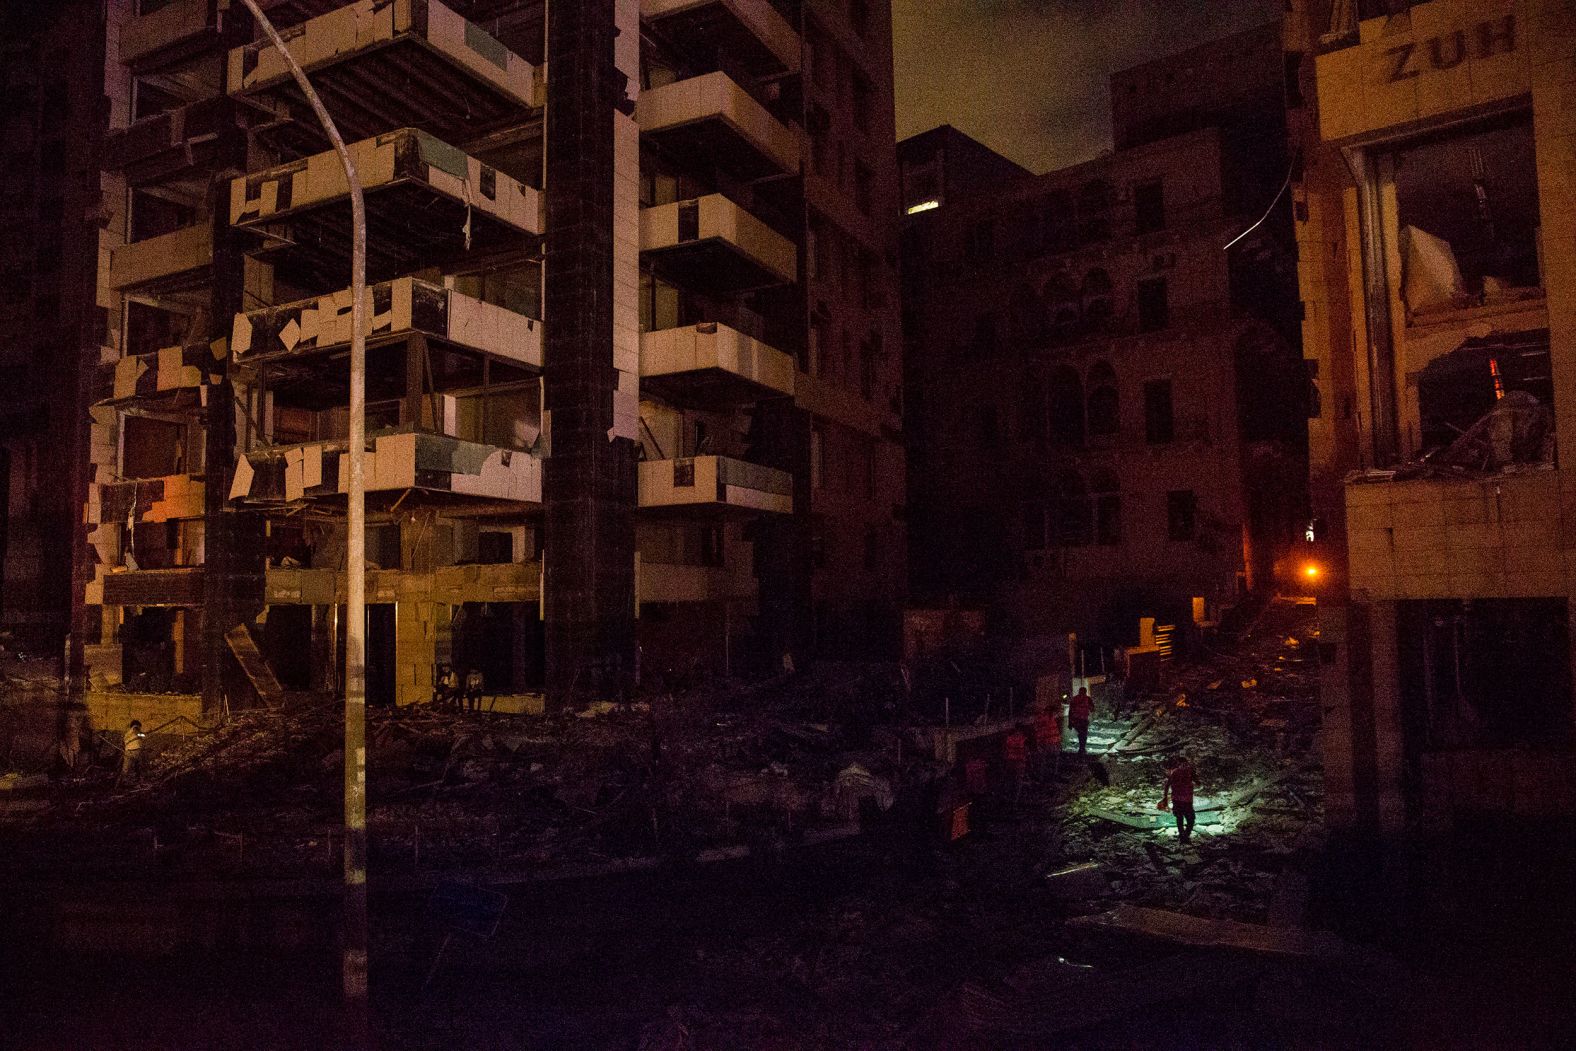 Rescue crews search a street for survivors on August 4, 2020. "People are asking the emergency department about their loved ones, and it is difficult to search at night because there is no electricity," Health Minister Hamad Hassan <a href="https://www.cnn.com/middleeast/live-news/lebanon-beirut-explosion-live-updates-dle-intl/h_191ad60f239ae9b49e4332022ce8db8c" target="_blank">told the Reuters news agency.</a> "We are facing a real catastrophe and need time to assess the extent of damages."